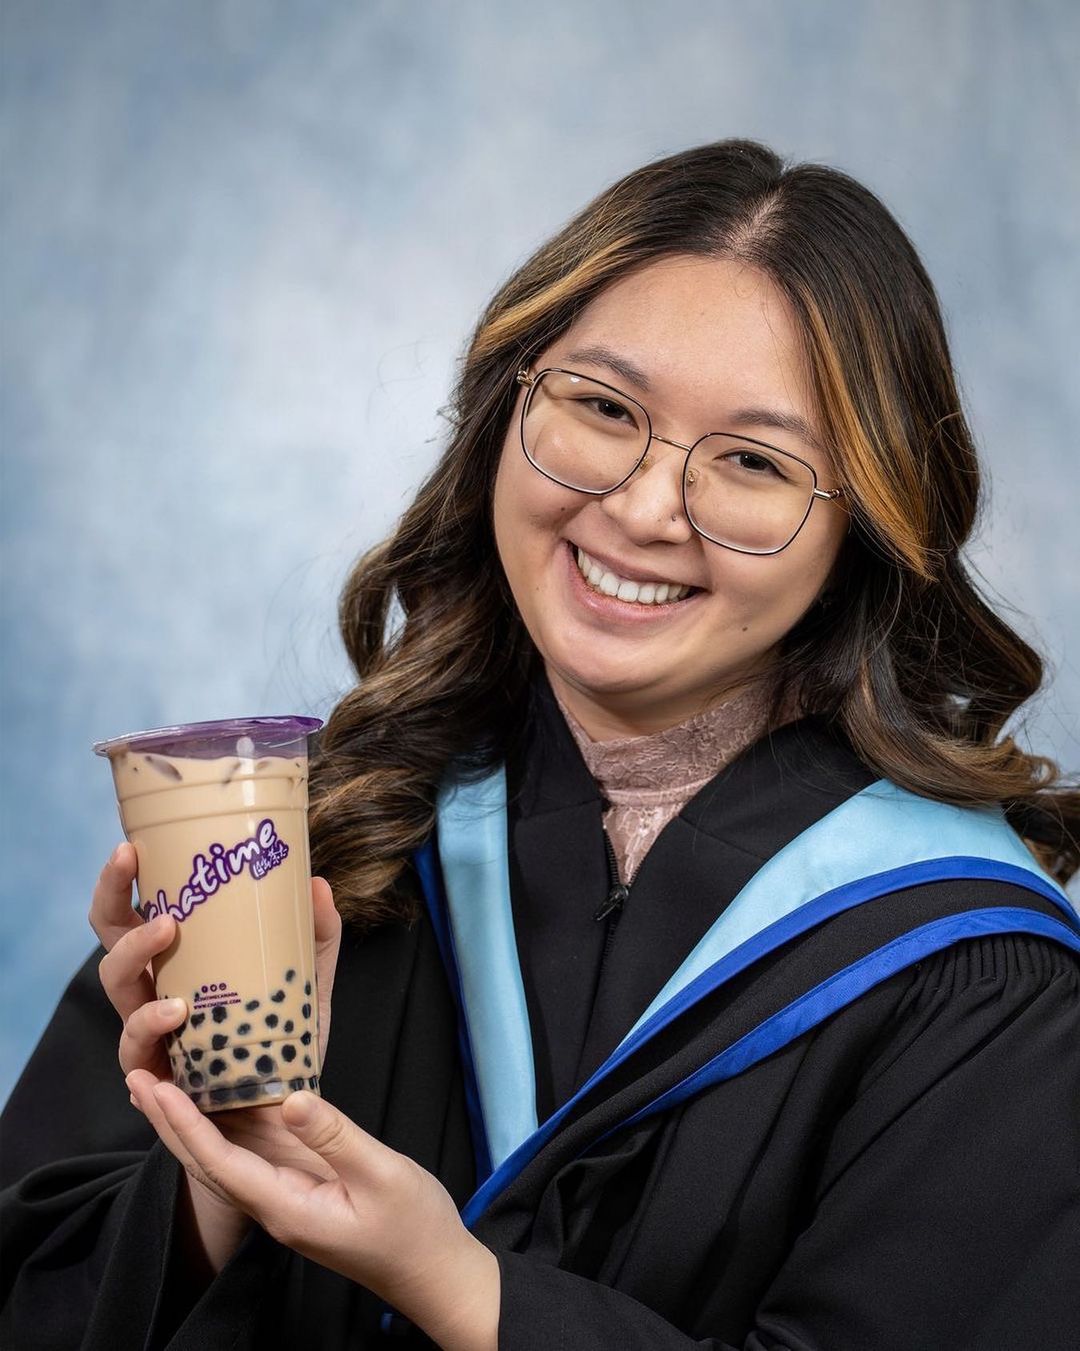 @angevaa

“Nothing like a classic milk tea with pearls to accompany me through many long nights of studying! It’s been a tradition of mine to grab them every Friday with sushi burrito and my roomies and I always come back to Chatime to get our cravings satisfied. Love it and highly recommend!”